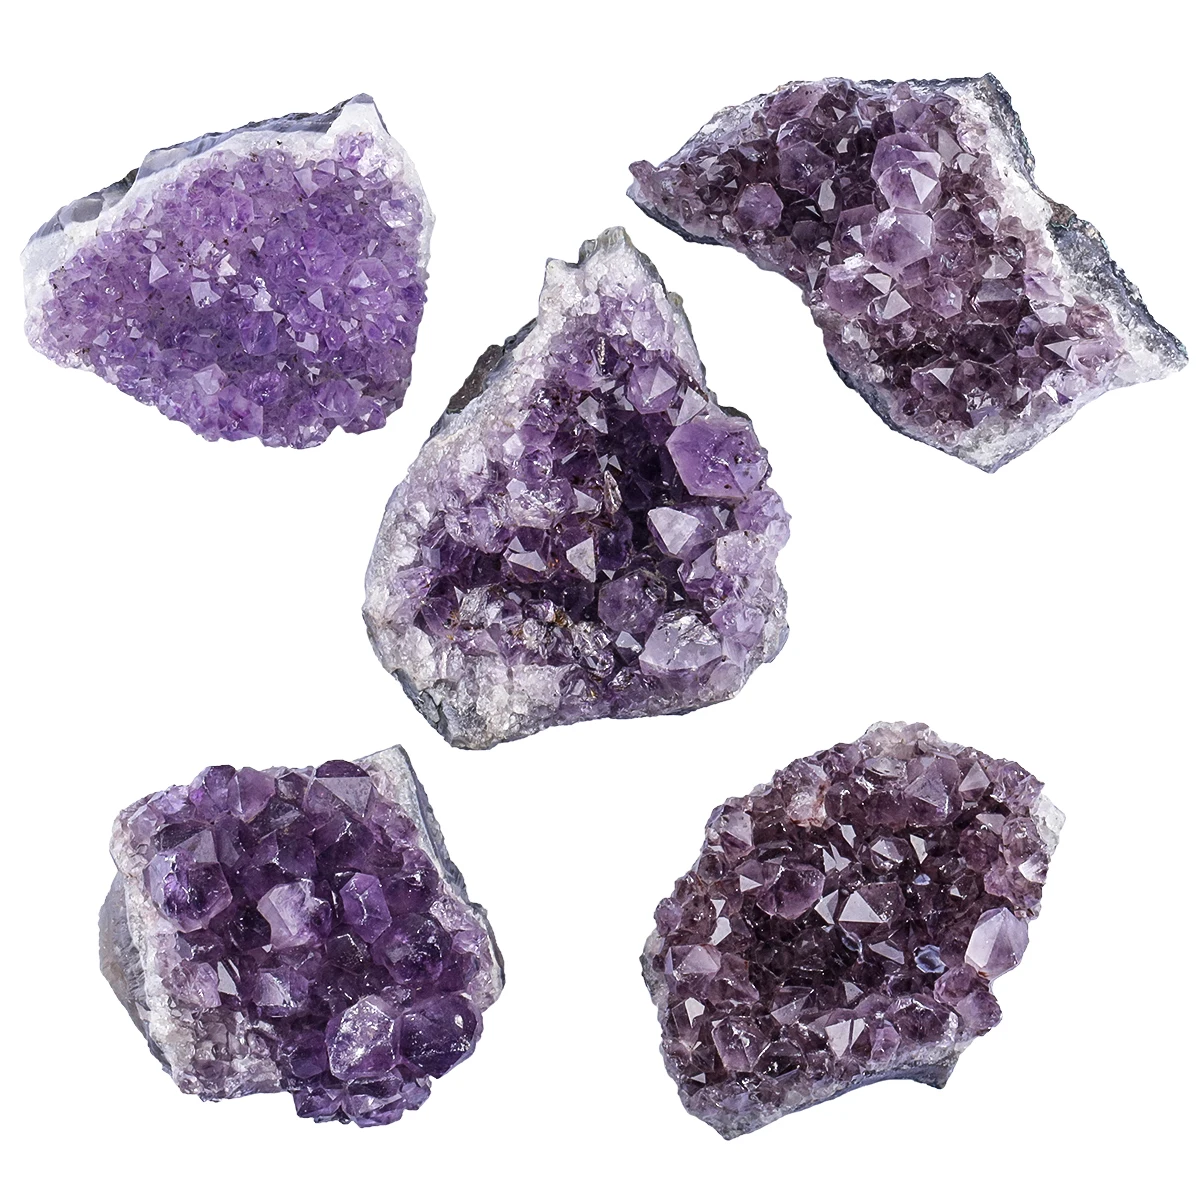 400g Natural Amethyst Cluster Healing Rough Gemstone Mineral Specimen Chakra Balancing For Home Decoration tumbeelluwa natural crystal money tree with amethyst cluster base heart shaped lucky tree for fengshui room decor home ornaments